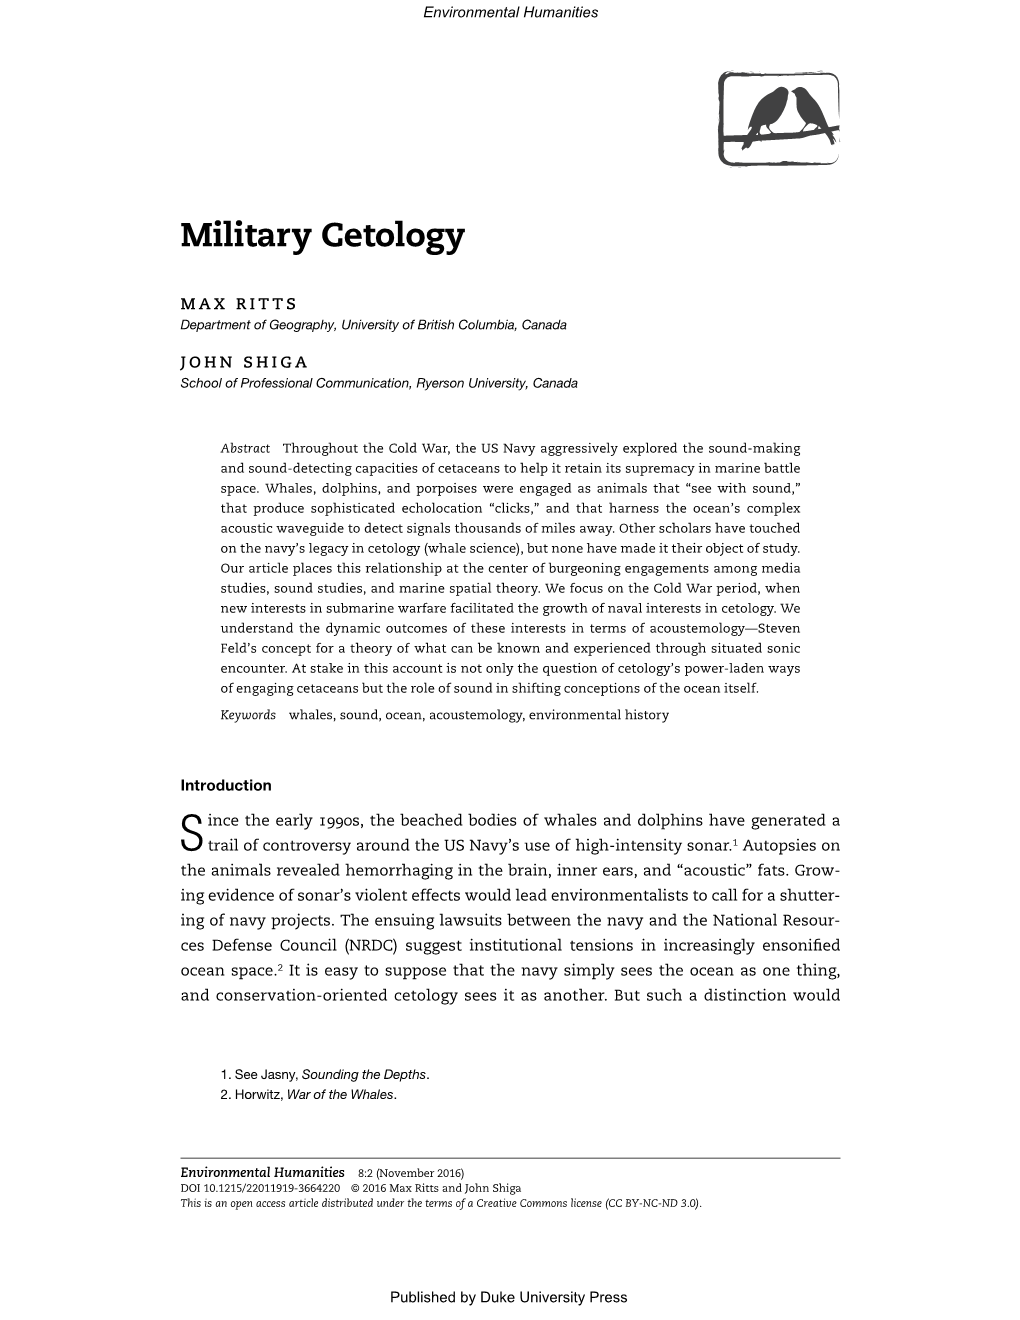 Military Cetology